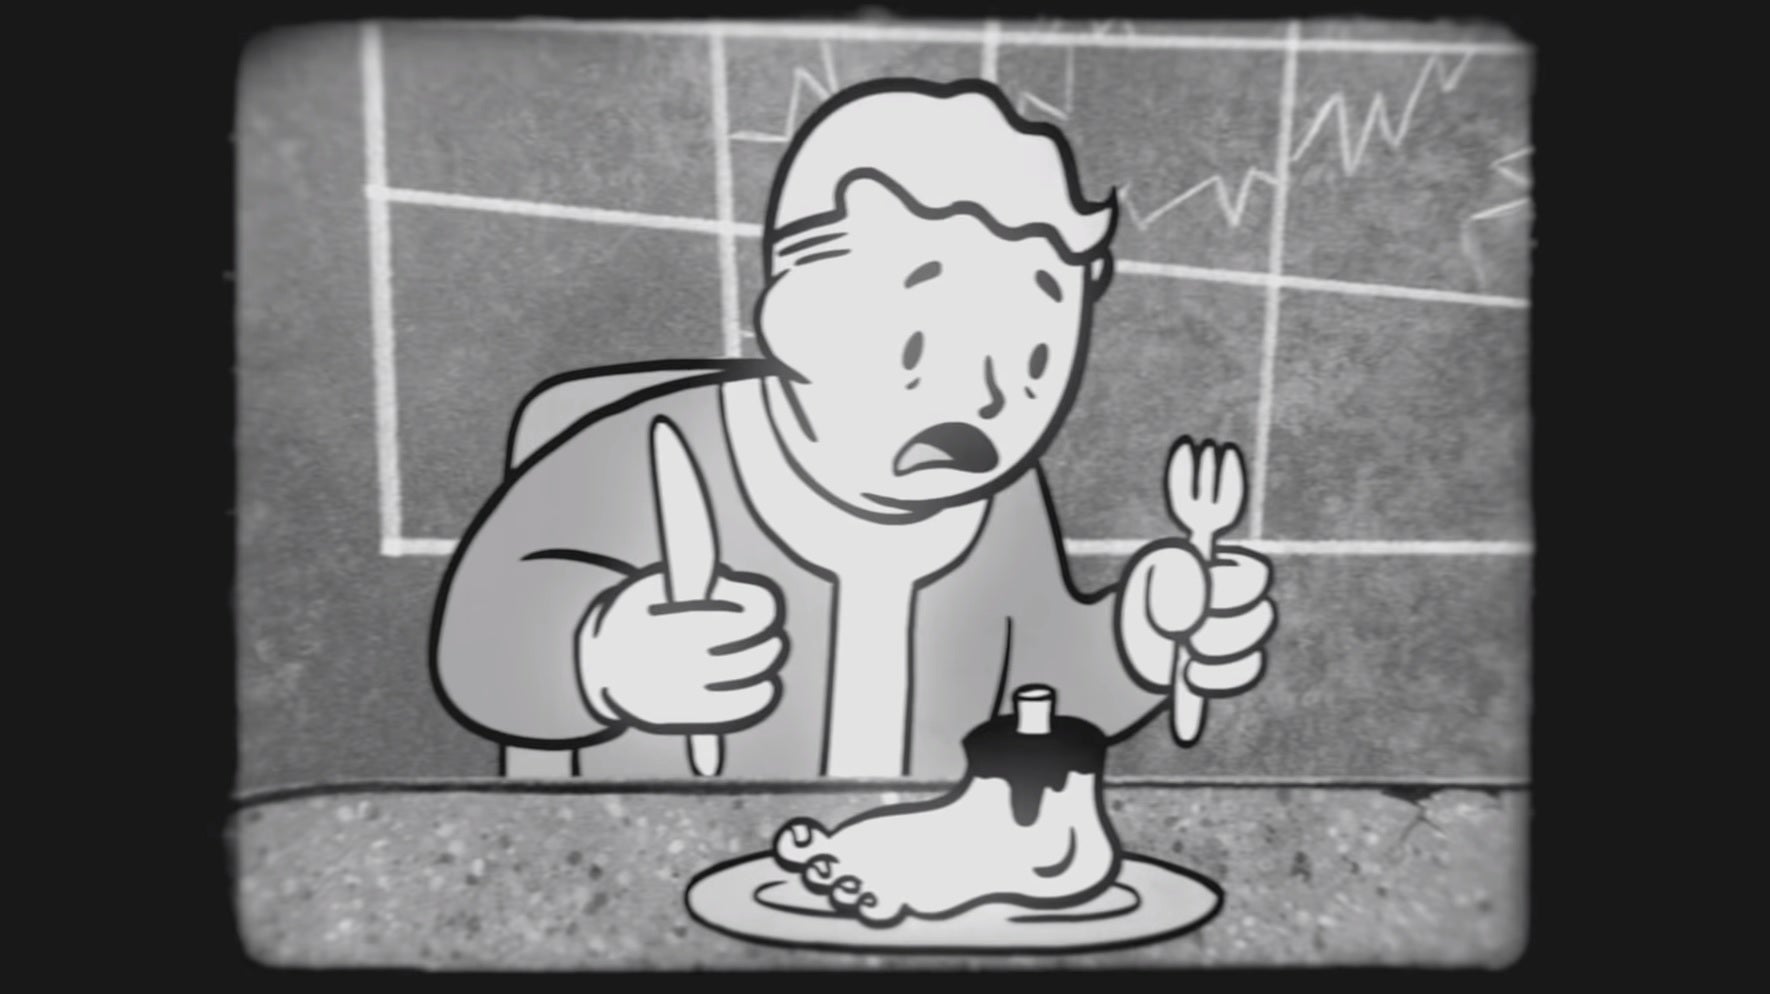 Fallout 3 speedrunning eats a baby in less than 20 minutes